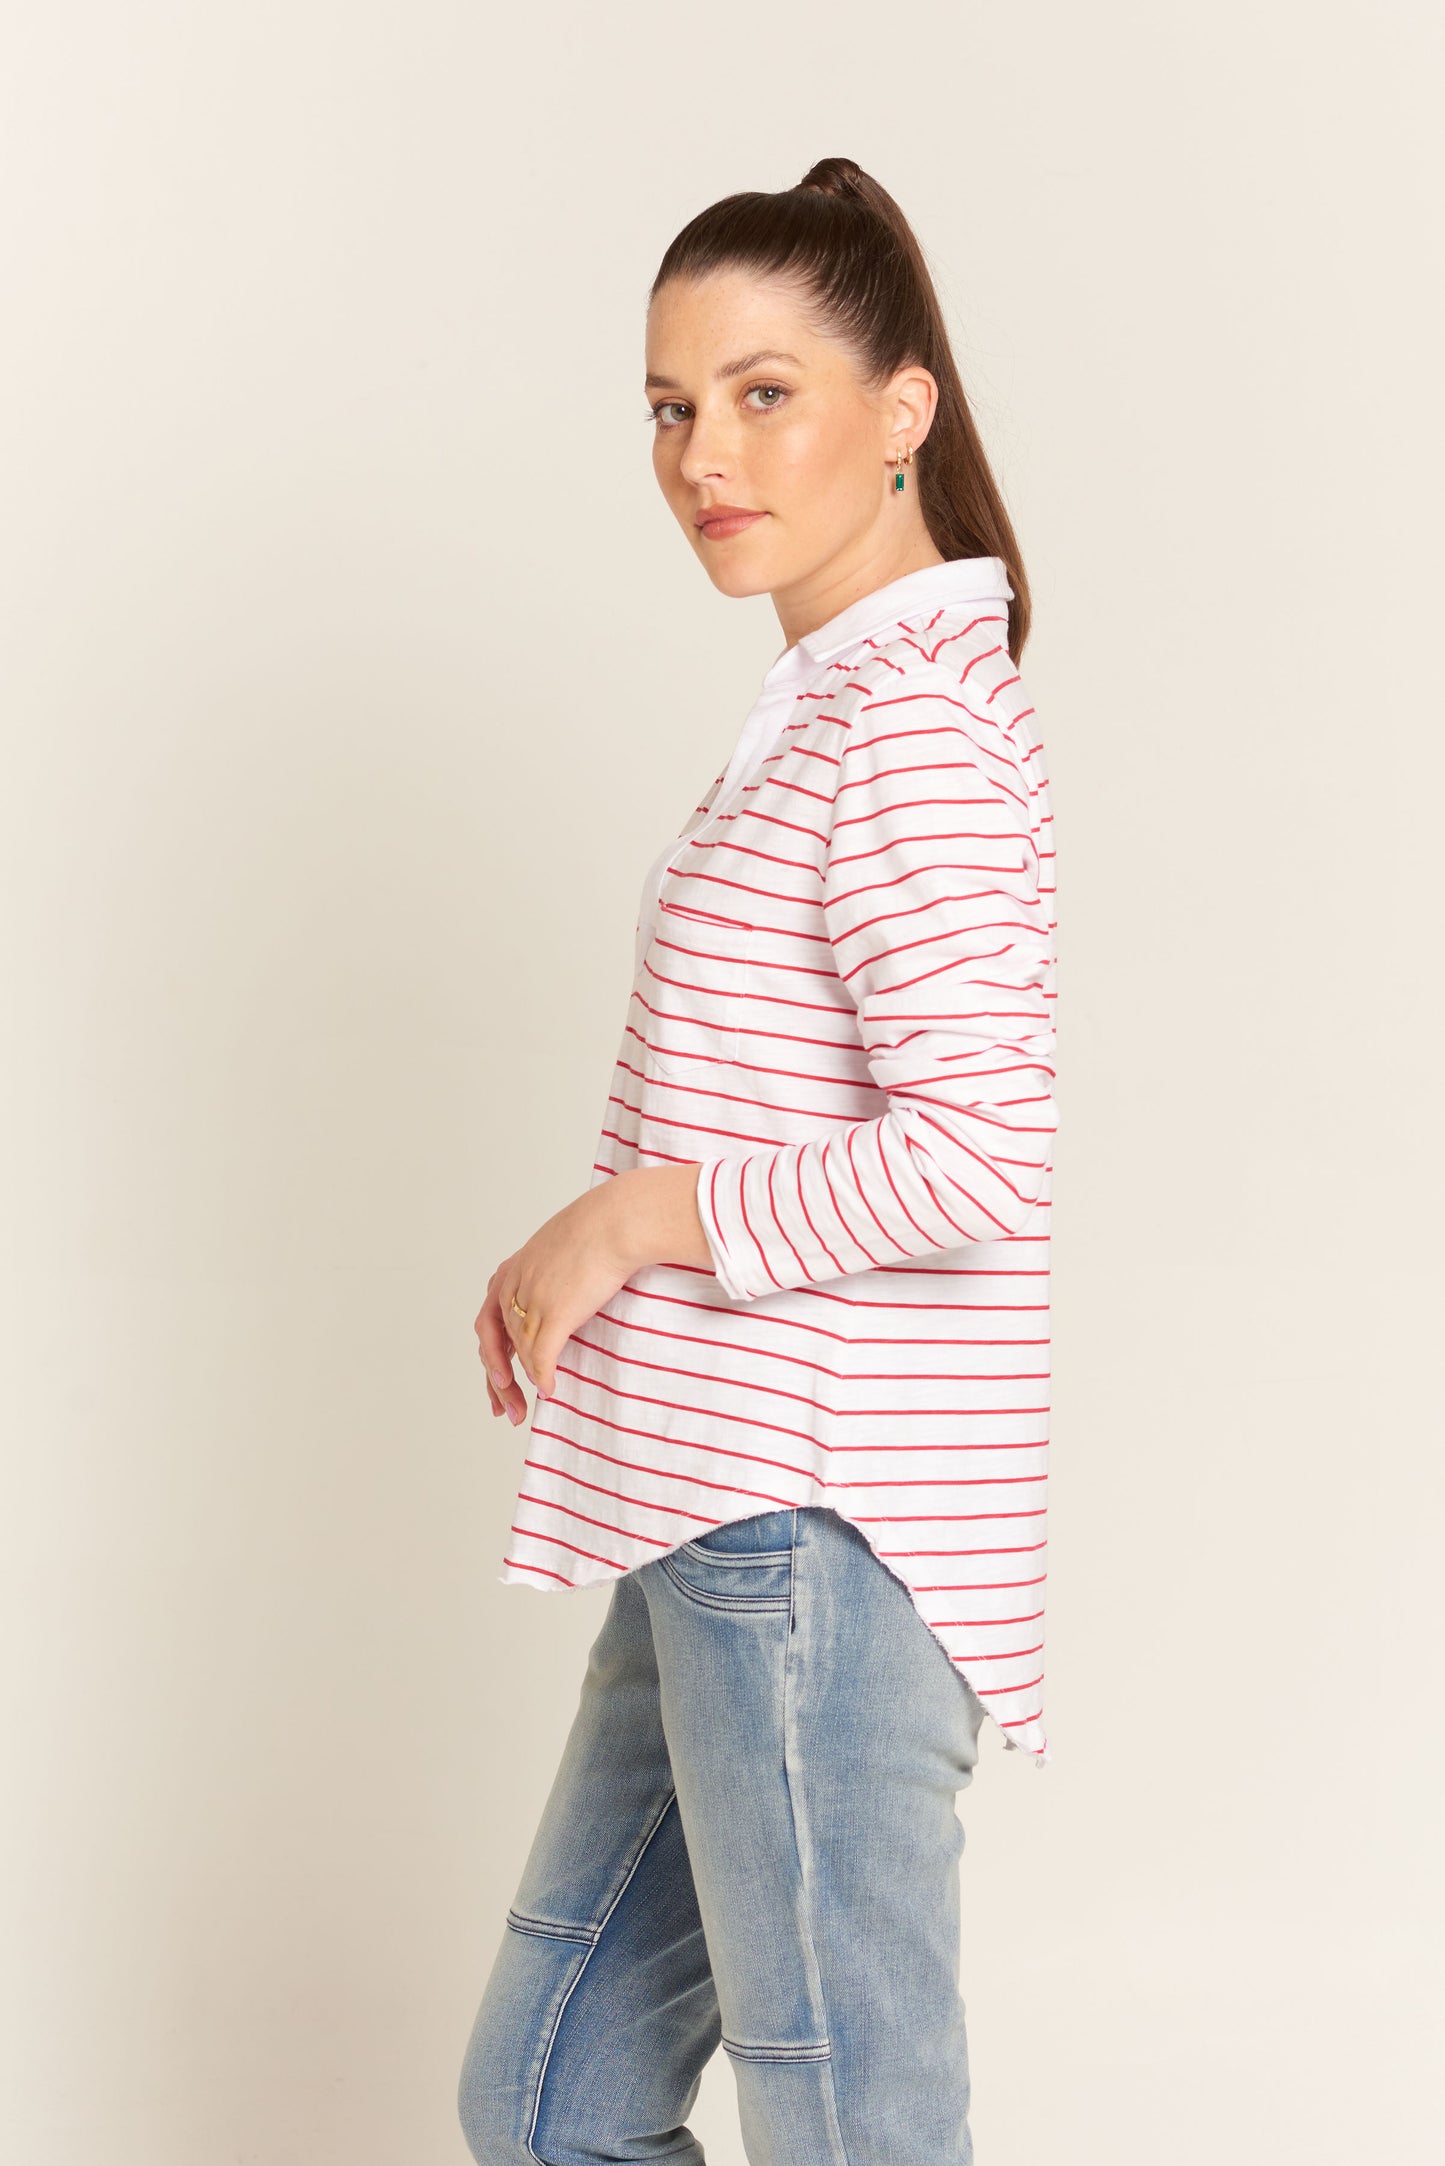 Cloth Paper Scissors Long Sleeve Stripe Printed Top White/Red | CPS1358-13